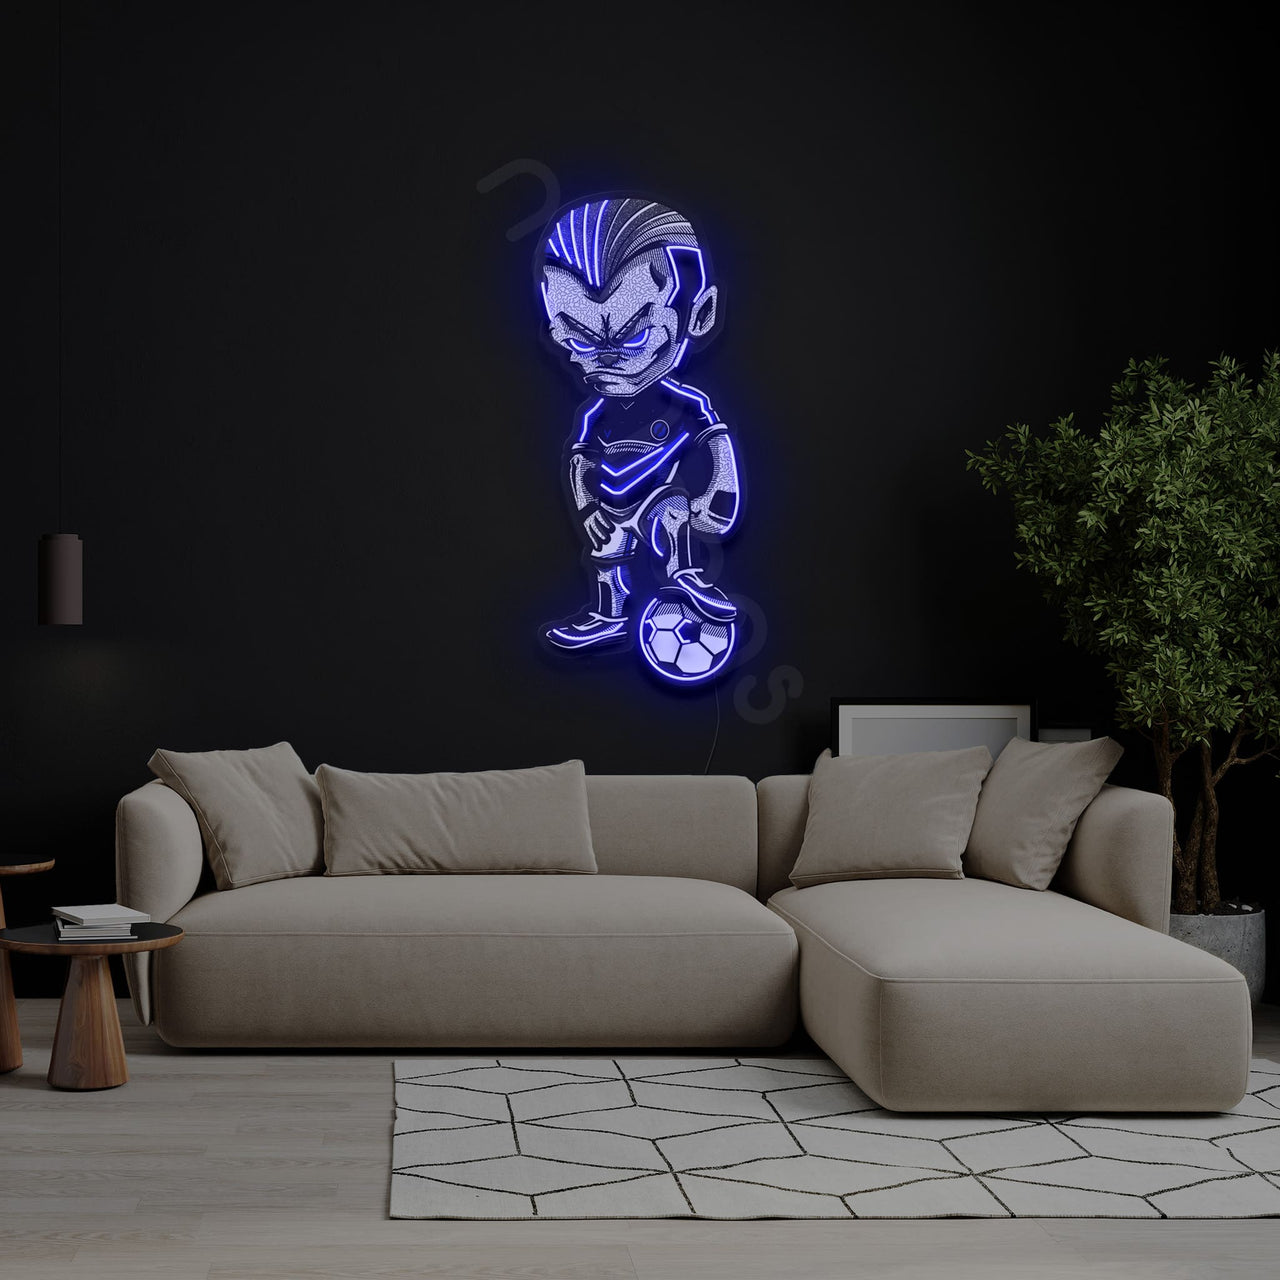 "Penalty Shootout" LED Neon x Acrylic Artwork by Neon Icons